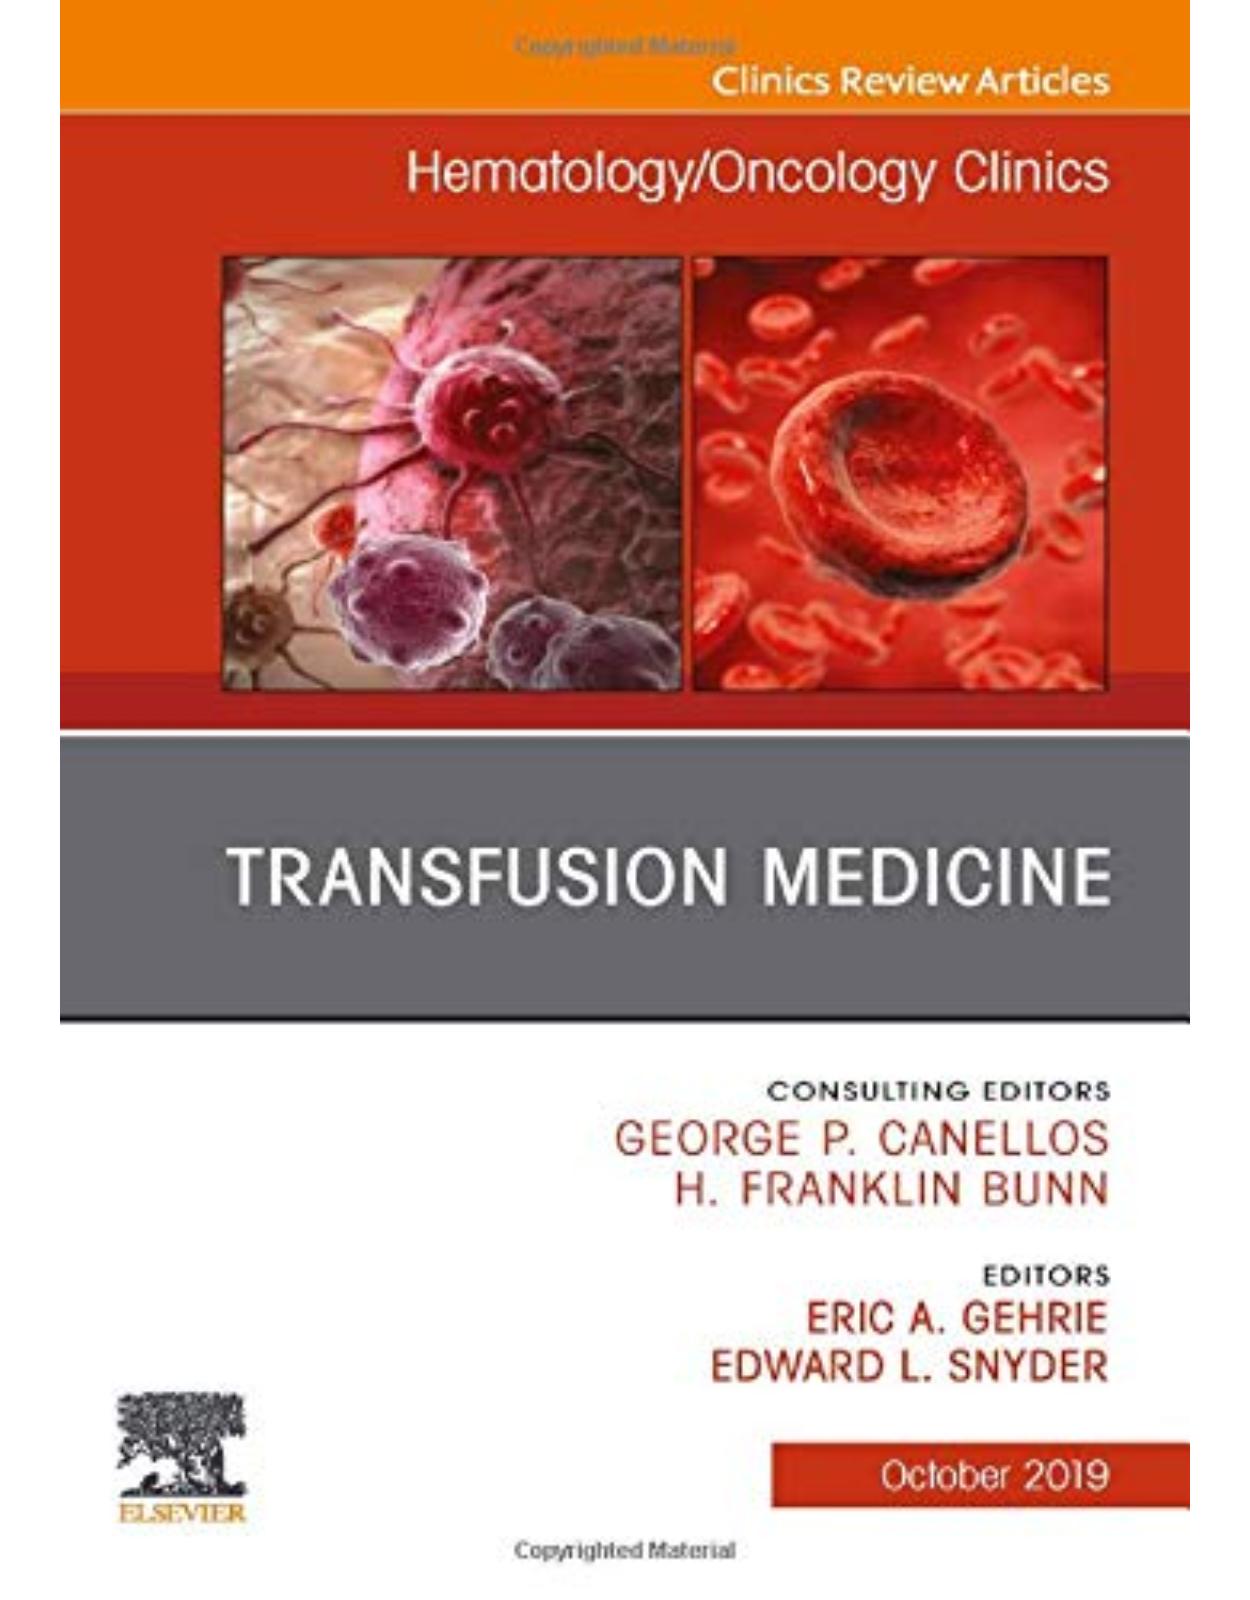 Transfusion Medicine, An Issue of Hematology/Oncology Clinics of North America, Volume 33-5